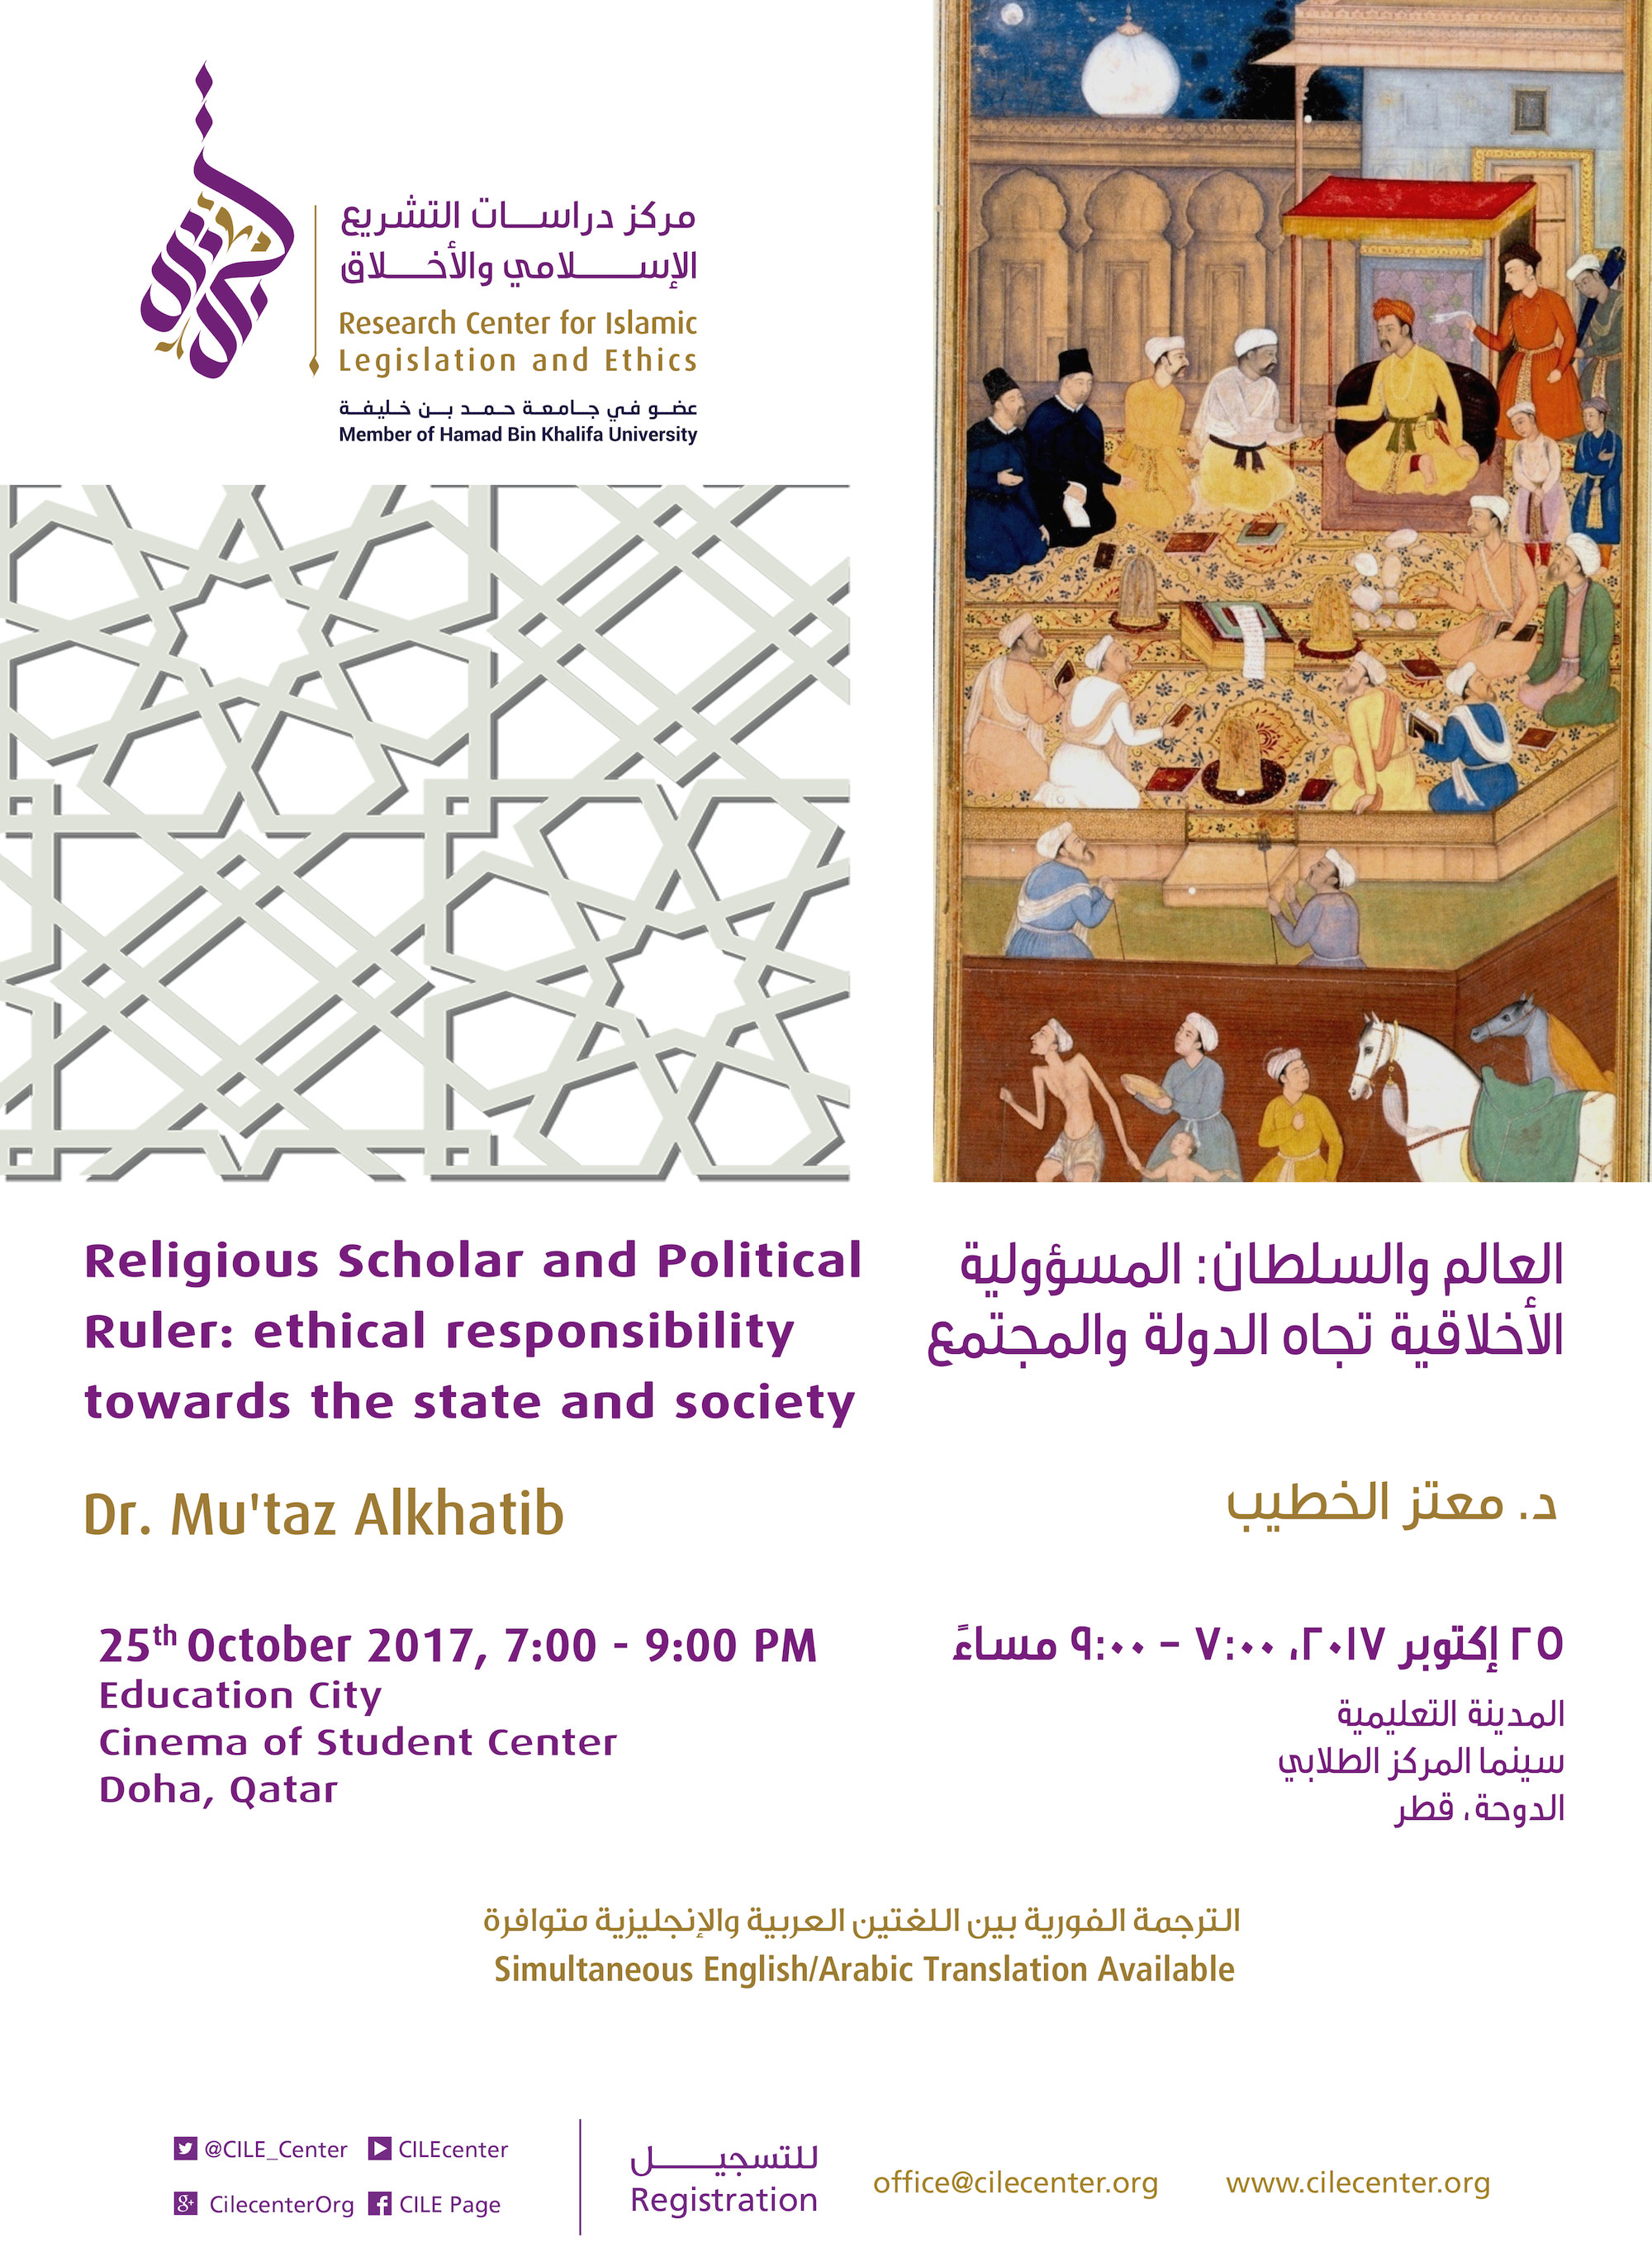 05/2017 Migrant Labour Reforms in Qatar: ongoing issues of rights and ethics